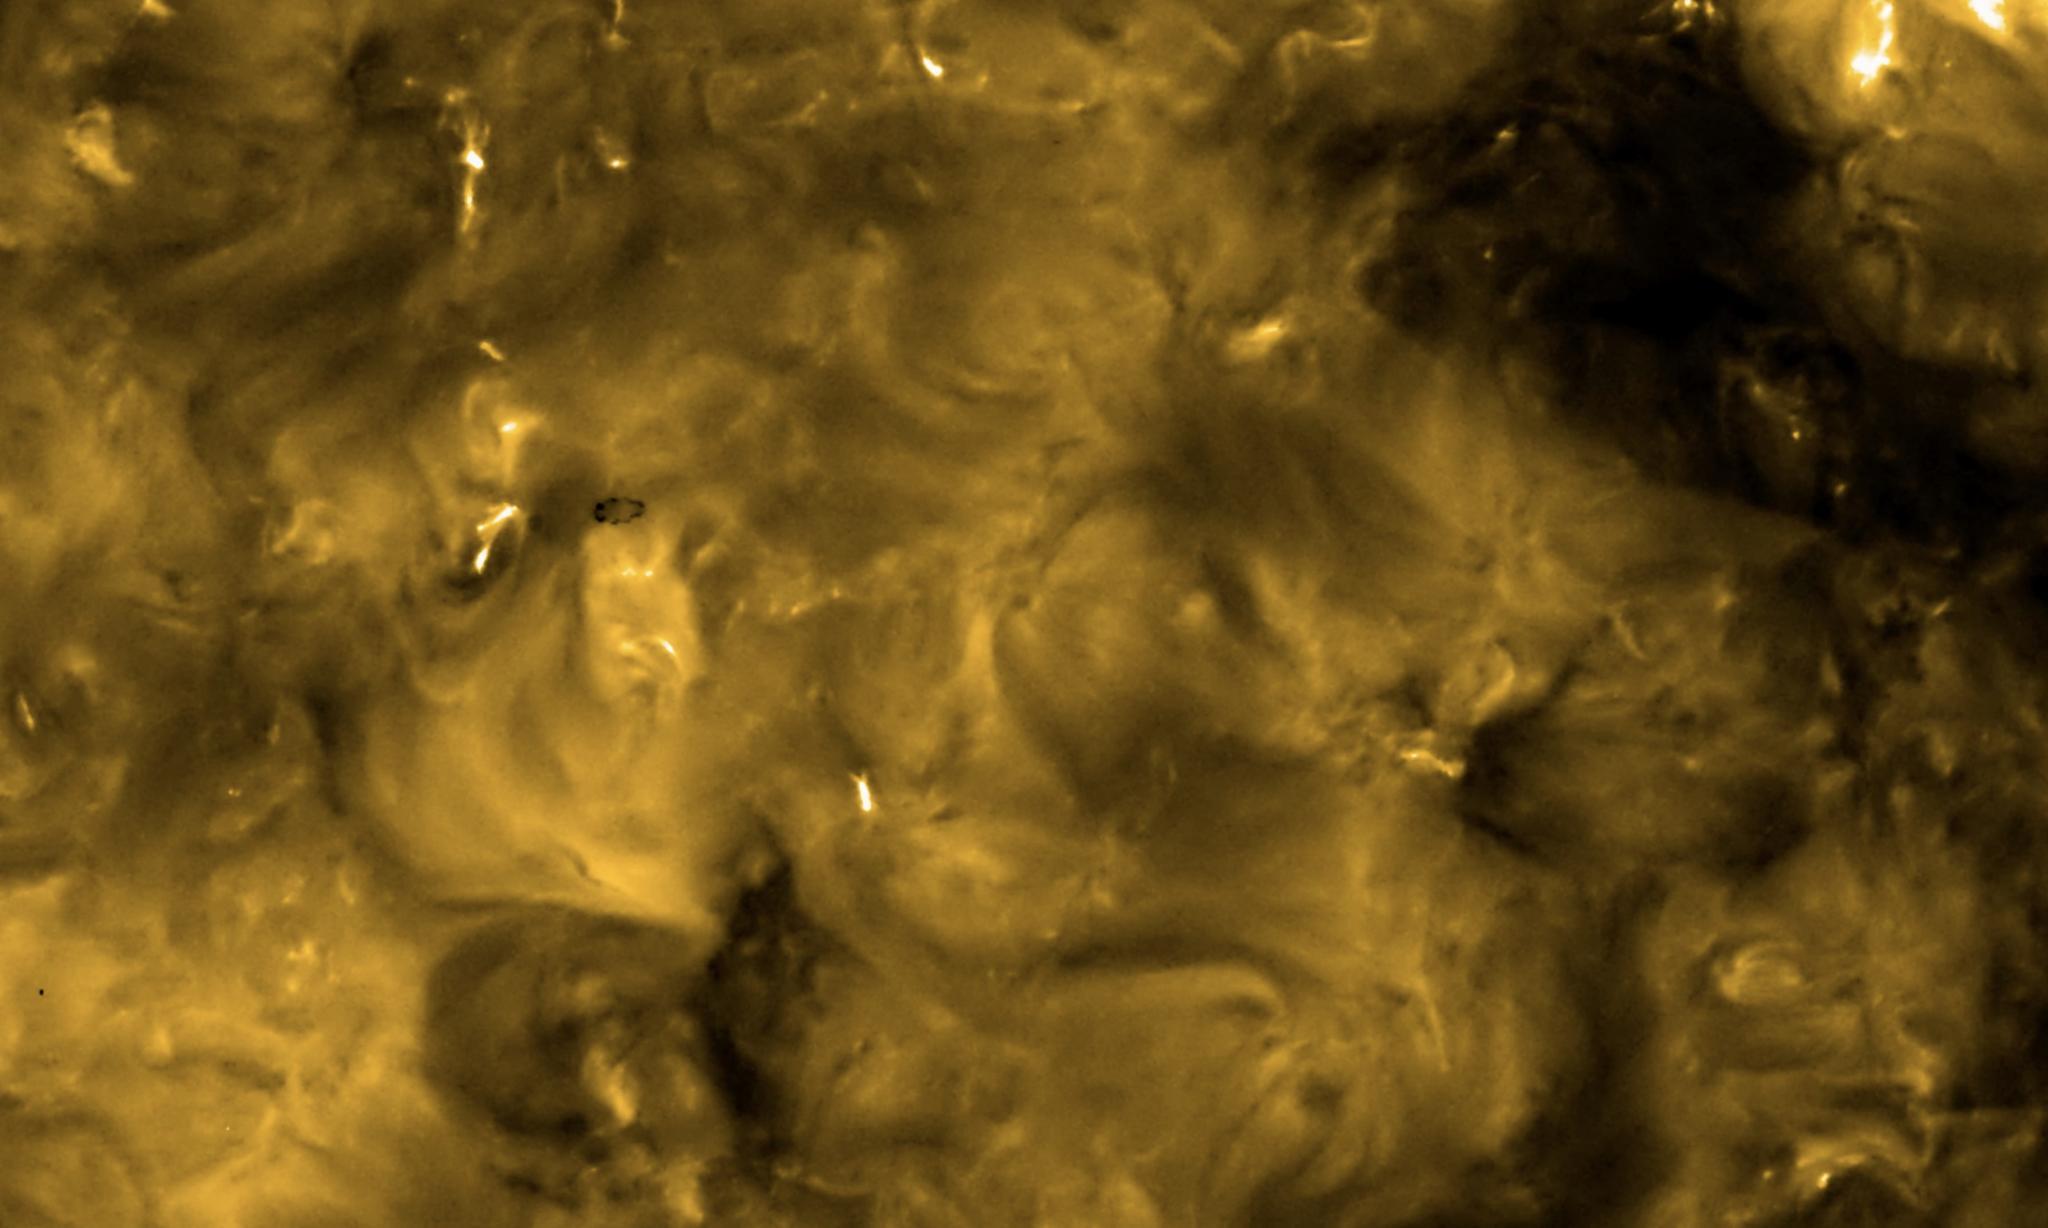 A high-resolution image from the Extreme Ultraviolet Imager (EUI) on ESA’s Solar Orbiter spacecraft